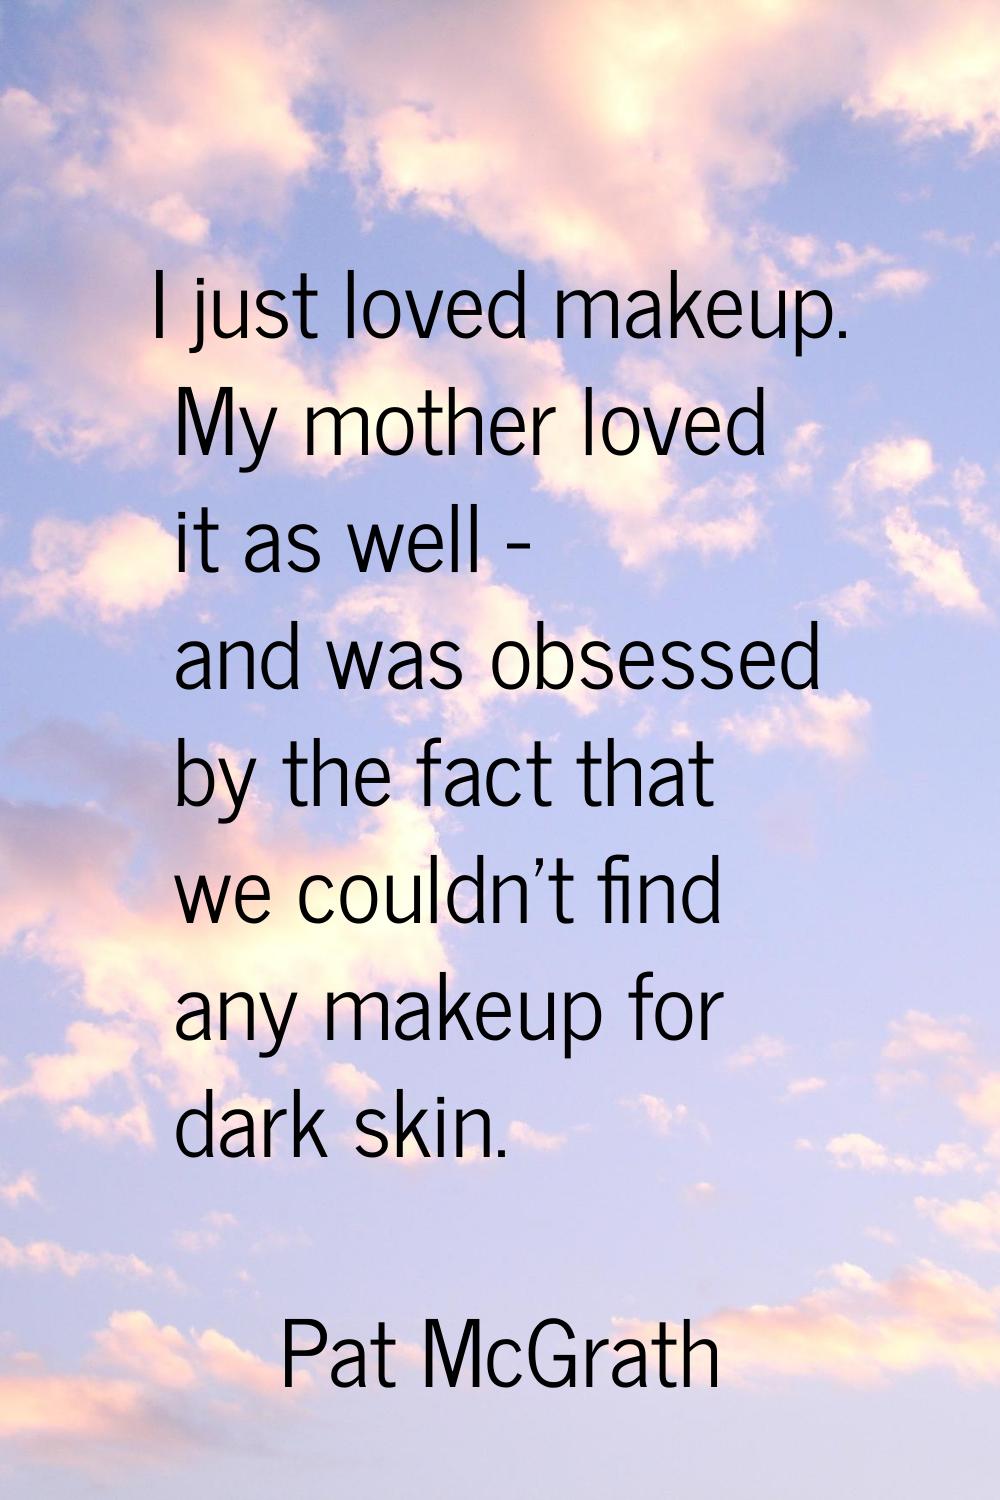 I just loved makeup. My mother loved it as well - and was obsessed by the fact that we couldn't fin